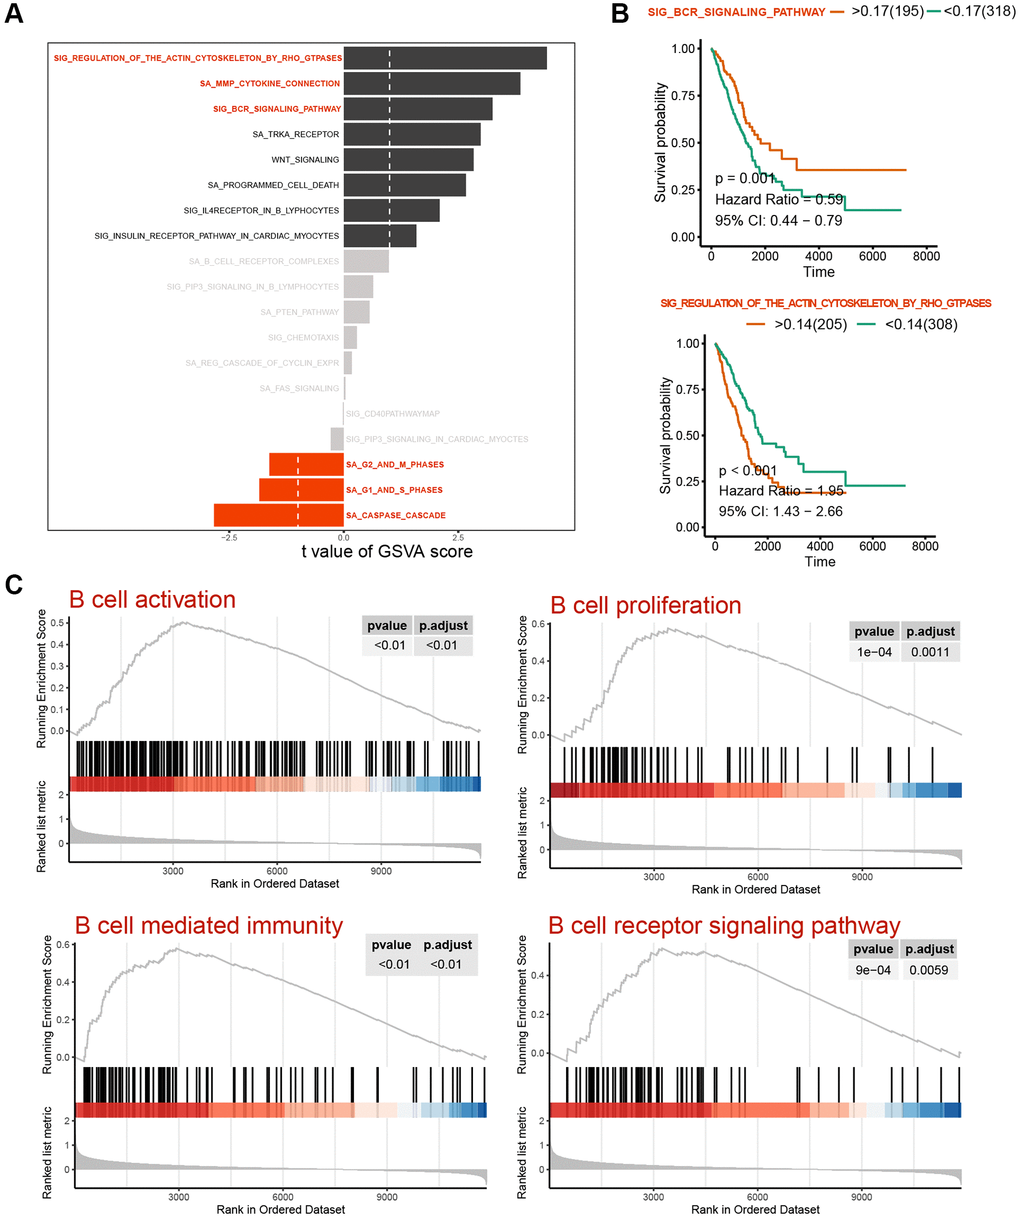 Variability analysis of immunoregulation-related pathways. (A) Differential analysis of variability scores of immunoregulation-related pathways in GSEA. (B) Survival analysis of the SIG